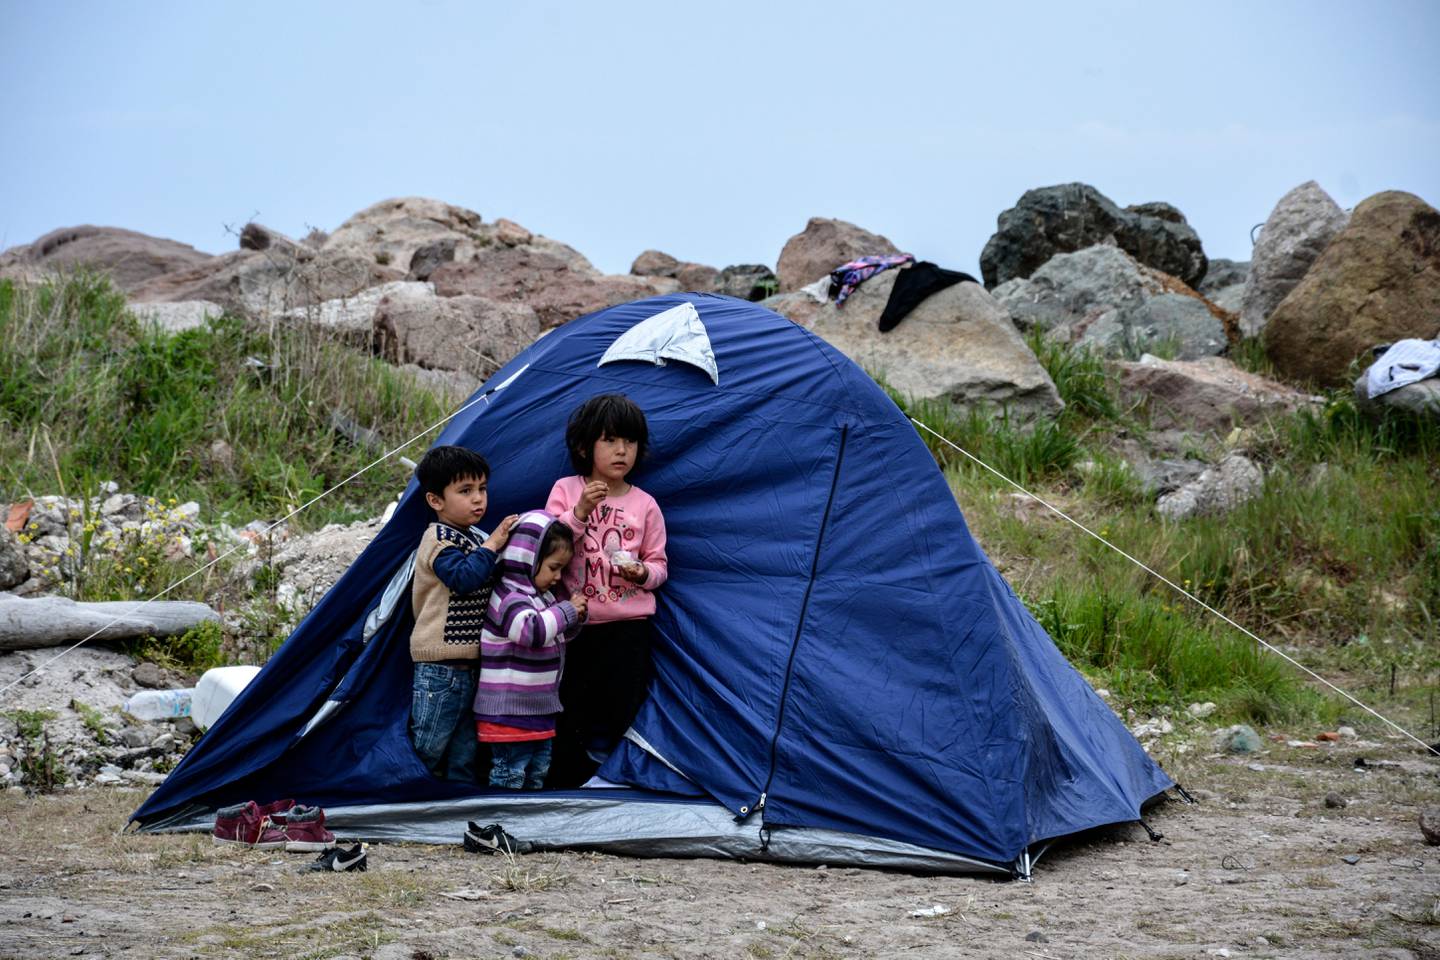 Children stand outside a tent in the village of Petra on the northeastern Aegean island of Lesbos, Greece, Friday, March 27, 2020. Some 56 migrants who reached Lesbos in smugglers' boats from Turkey over the past few days have been quarantined in small tents in Petra for the past three days. Under public health measures adopted to hinder the spread of the new coronavirus, Greece places all people arriving from abroad in two-week quarantine. Lesbos' main migrant facility, near the village of Moria, is crammed with about 20,000 people even though it was built for 2,700. (AP Photo/Panagiotis Balaskas)